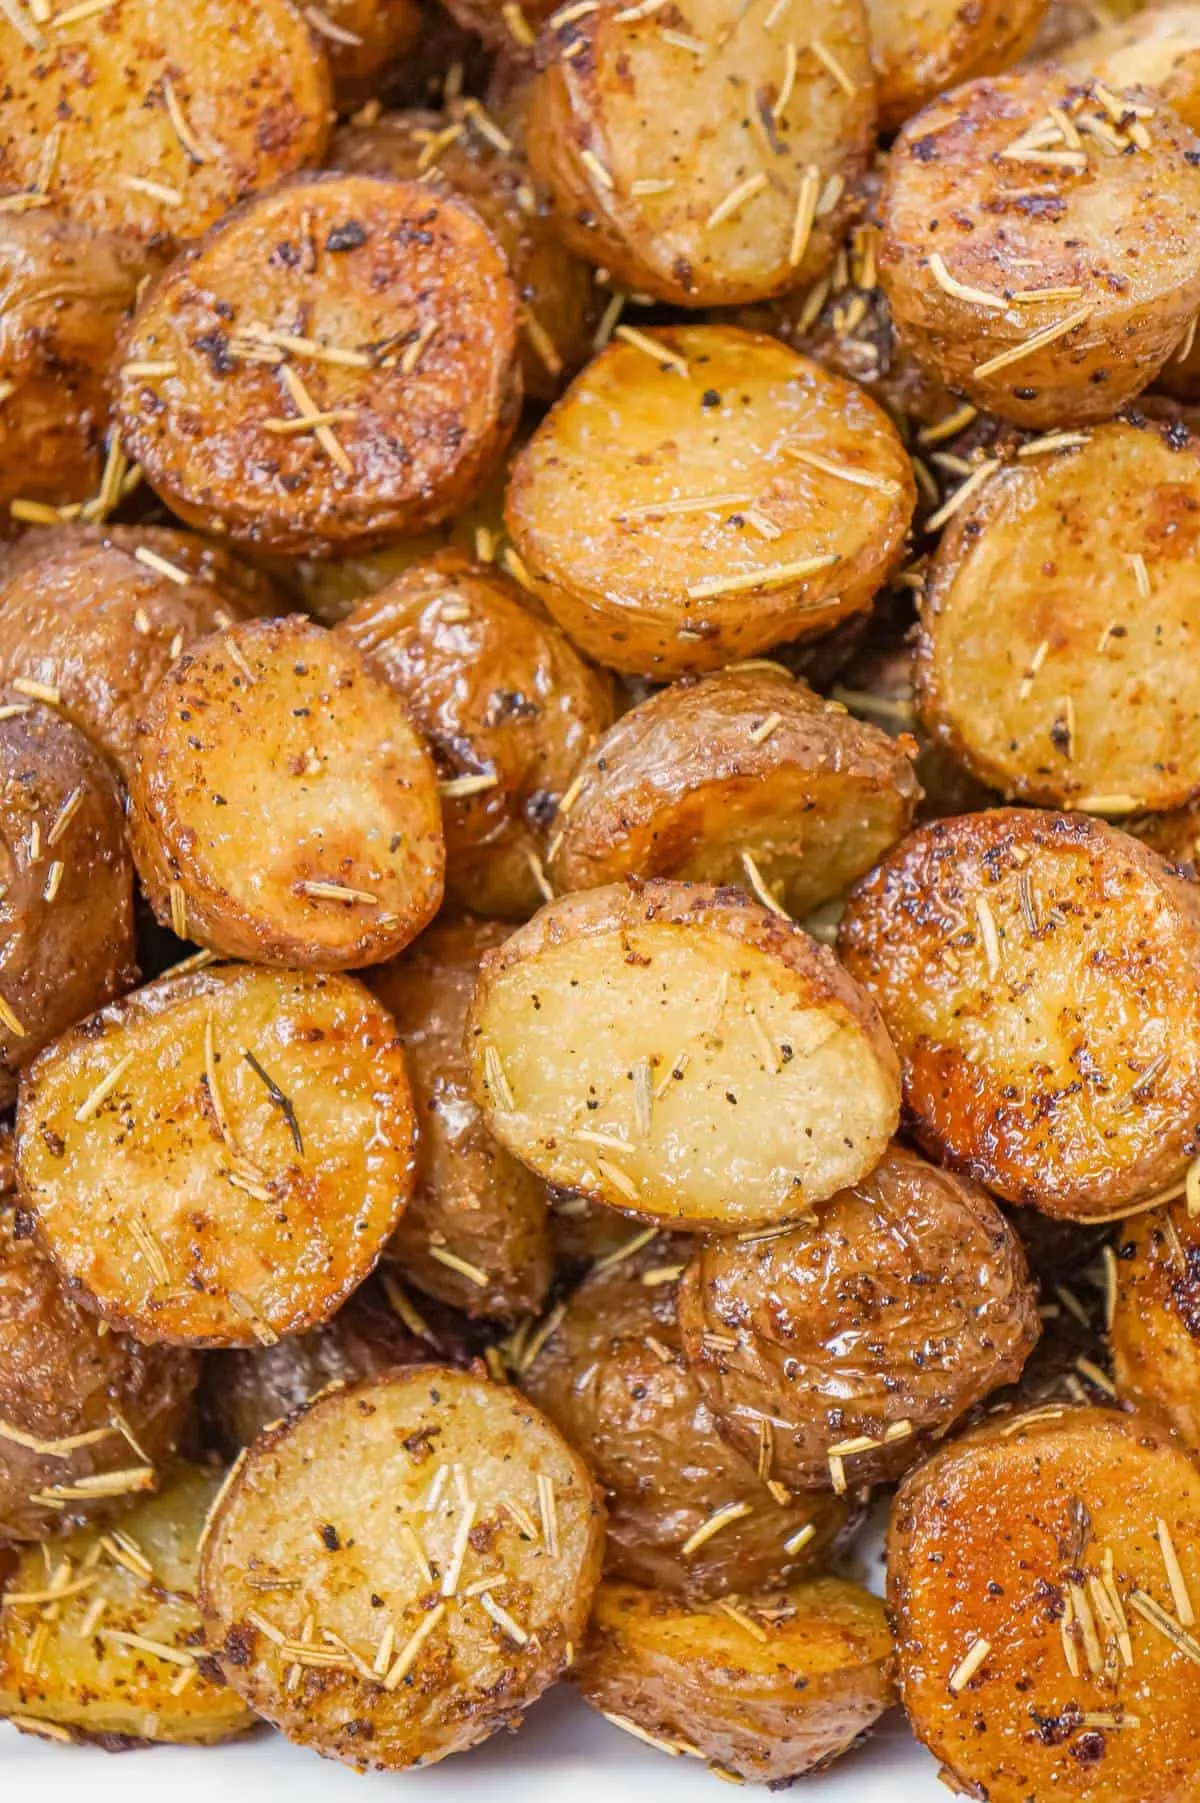 Roasted Potatoes with Rosemary are a simple and delicious side dish perfect for serving with a variety of meals.